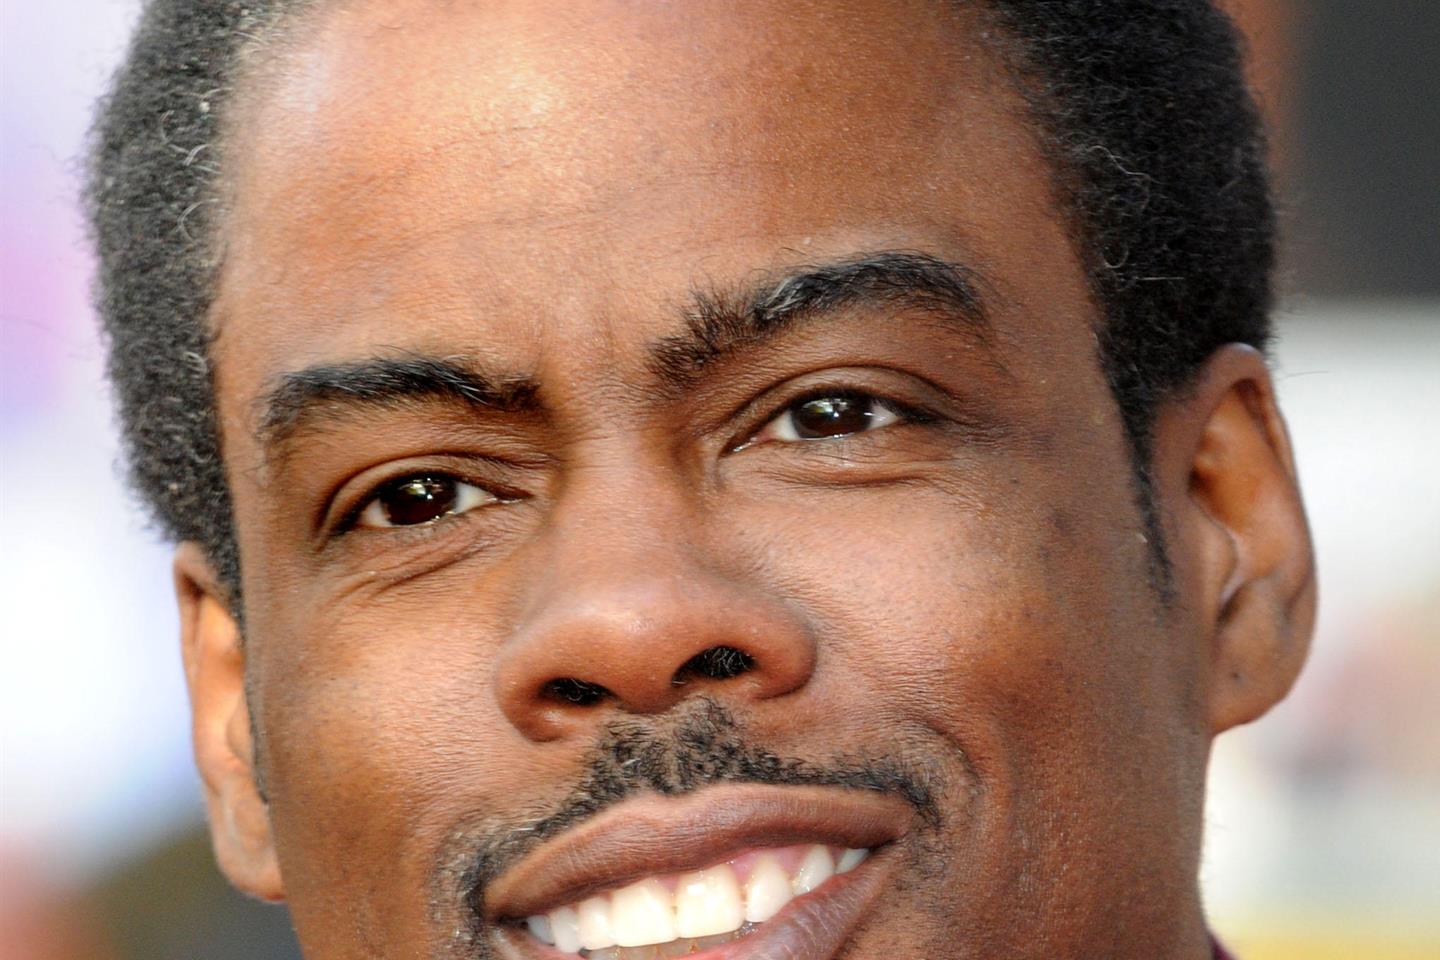 Chris Rock Tickets Buy or Sell Tickets for Chris Rock Tour Dates